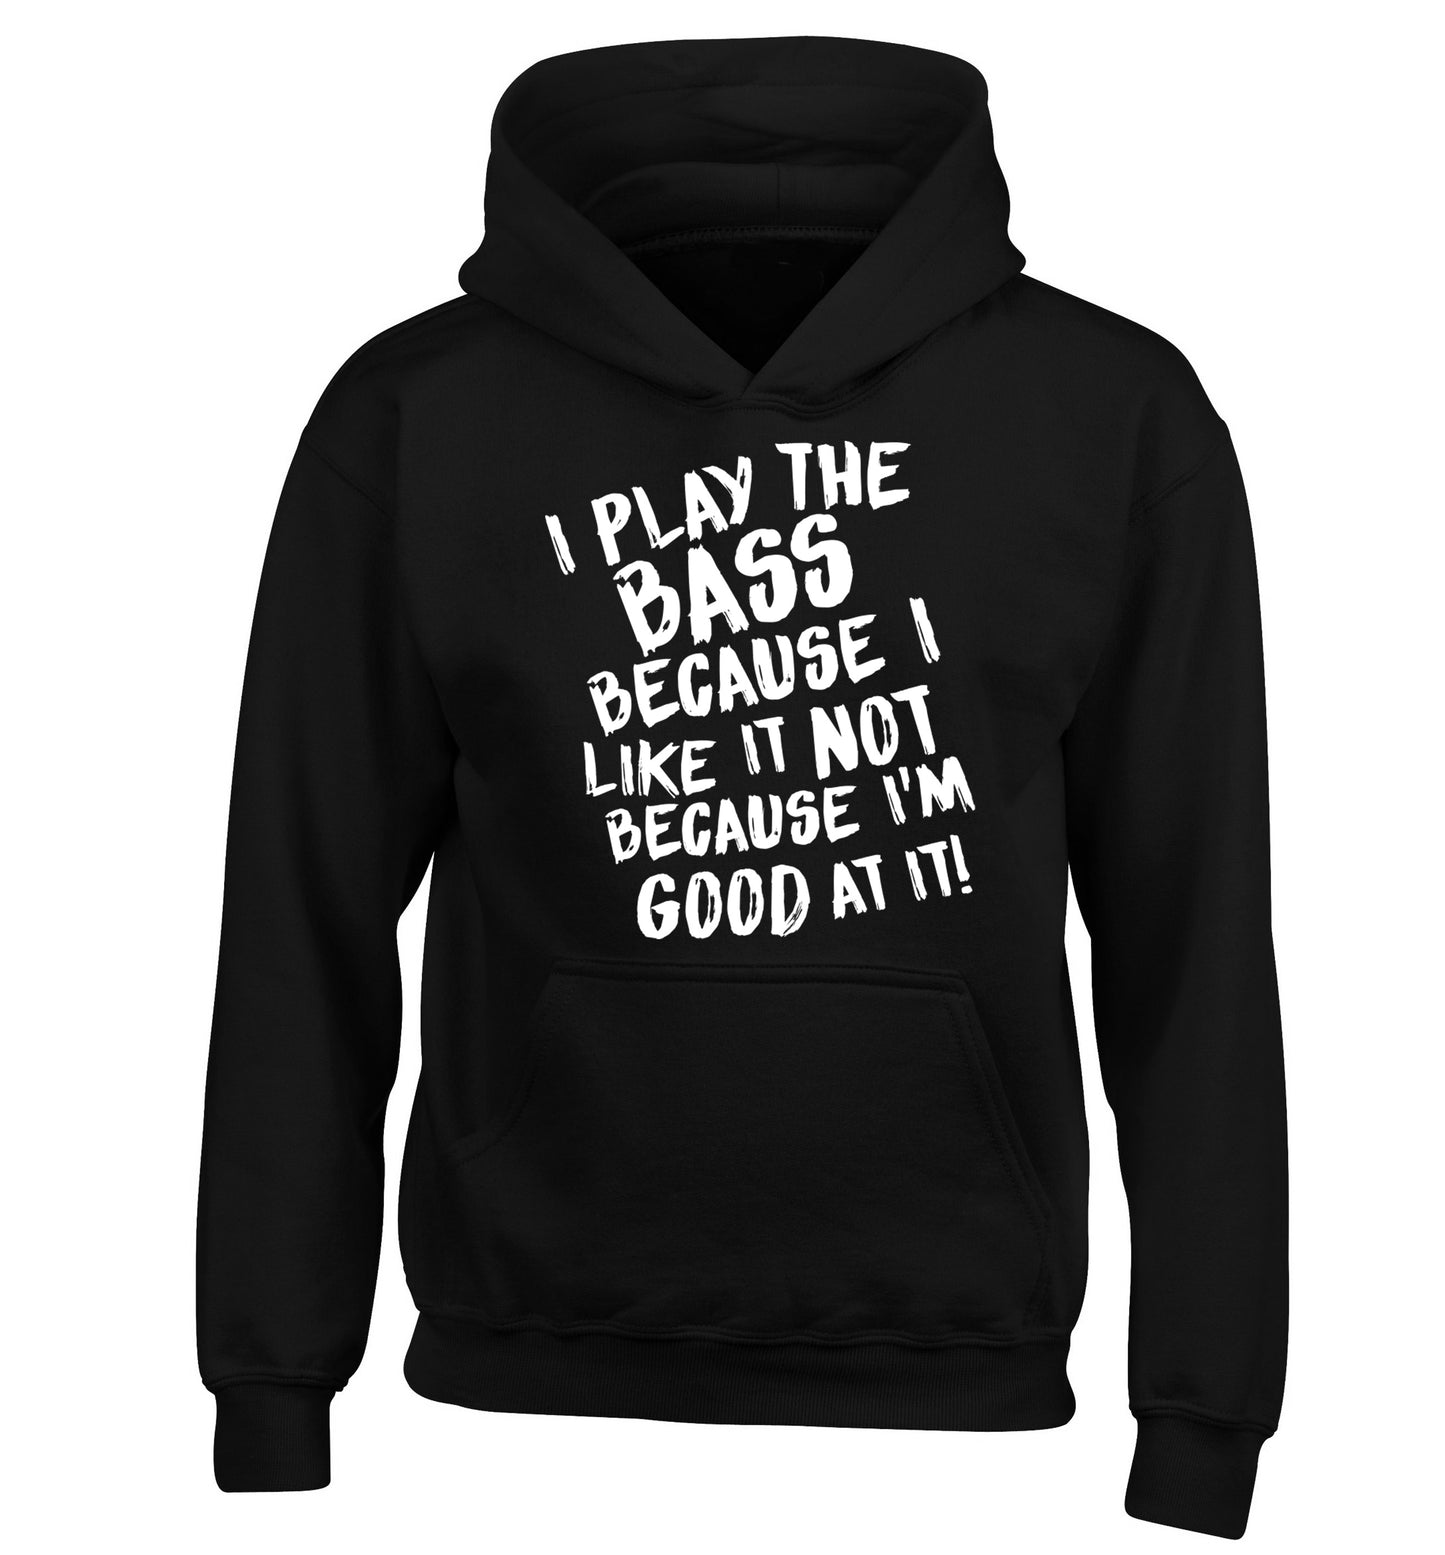 I play the bass because I like it not because I'm good at it children's black hoodie 12-14 Years